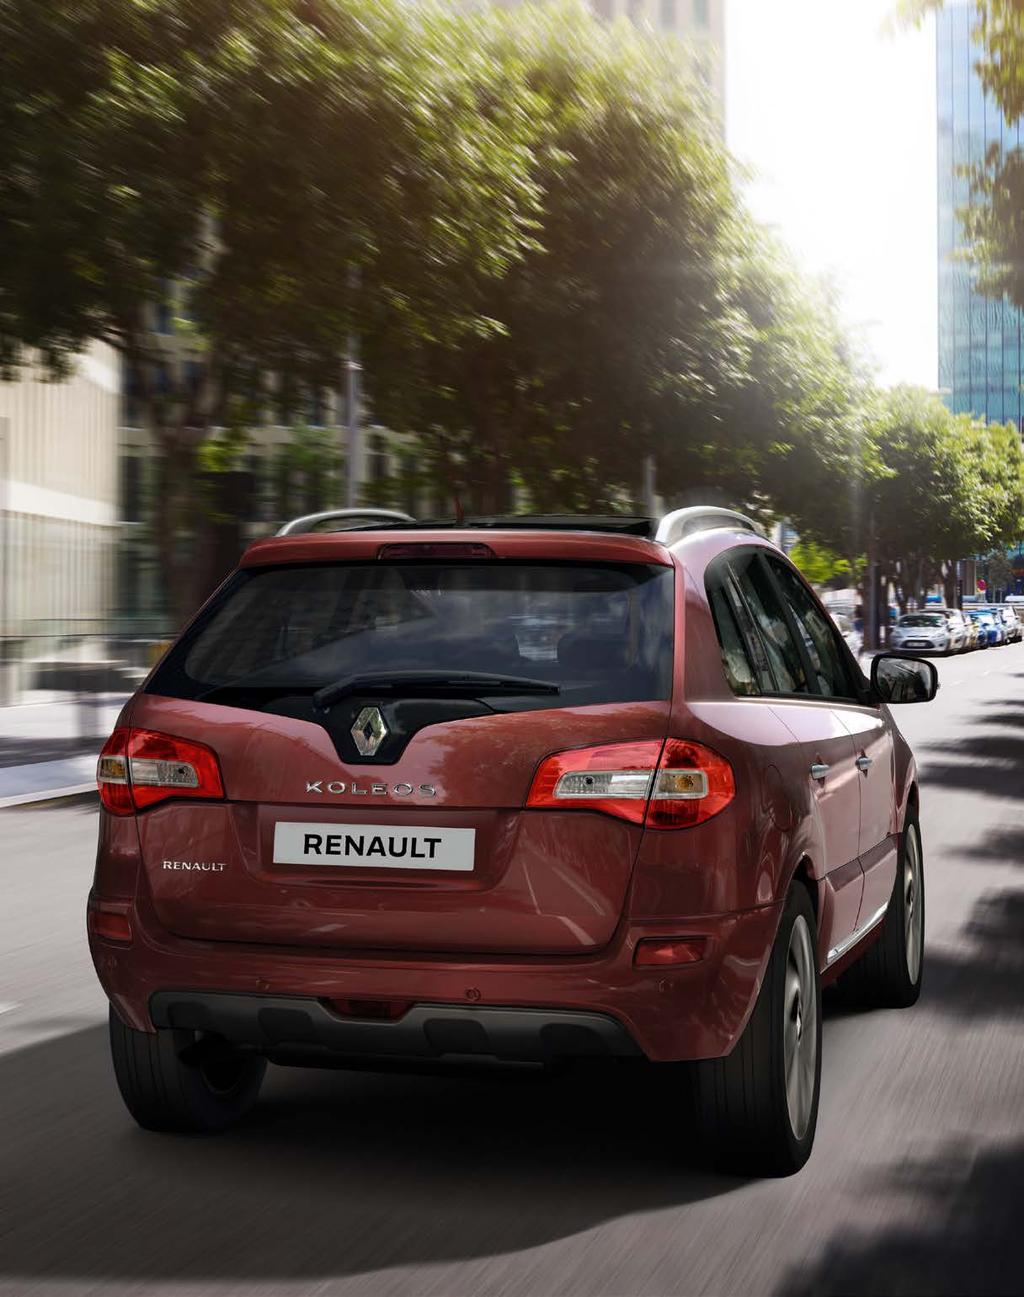 A better SUV. Room, height and versatility wrapped in European style and comfort. What could be better? The best way to understand why the Koleos is a better SUV is to sit in one.